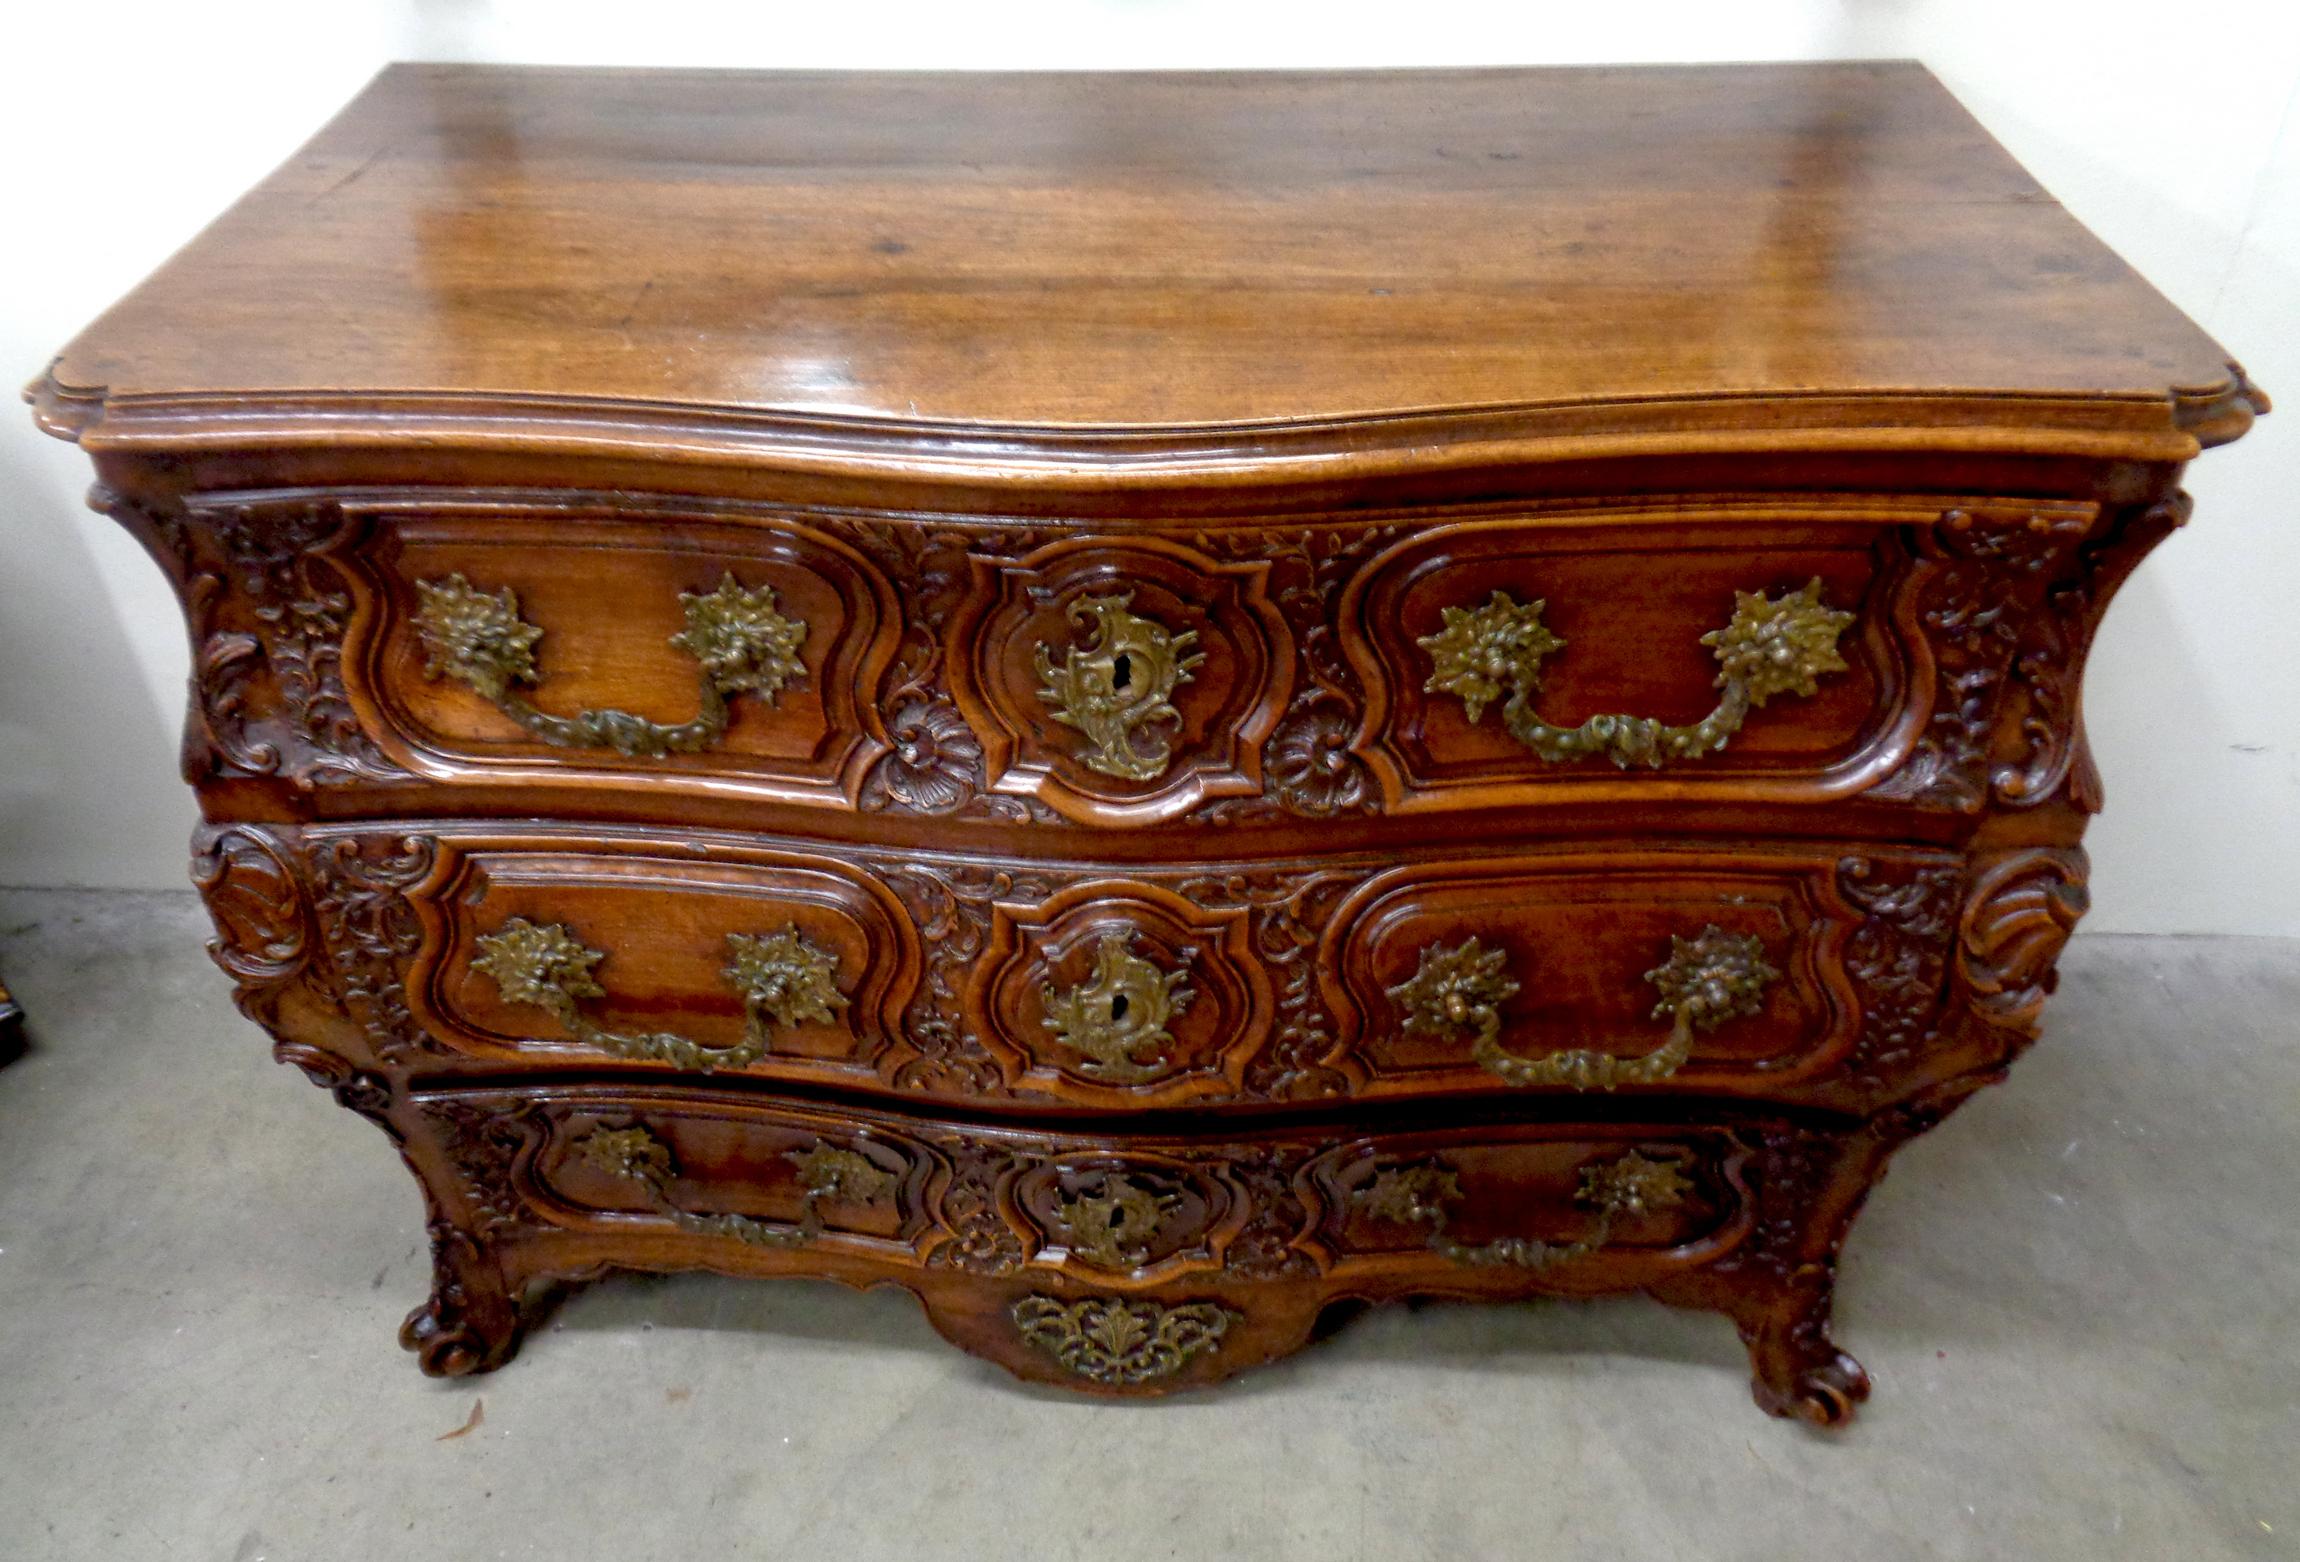 French walnut museum quality three-drawer Lyonnaise commode, circa 1730-1740. The commode is beautifully carved throughout and has richly colored patination. It has original chased bronze drawer pulls and key escutcheons. The face of the commode is